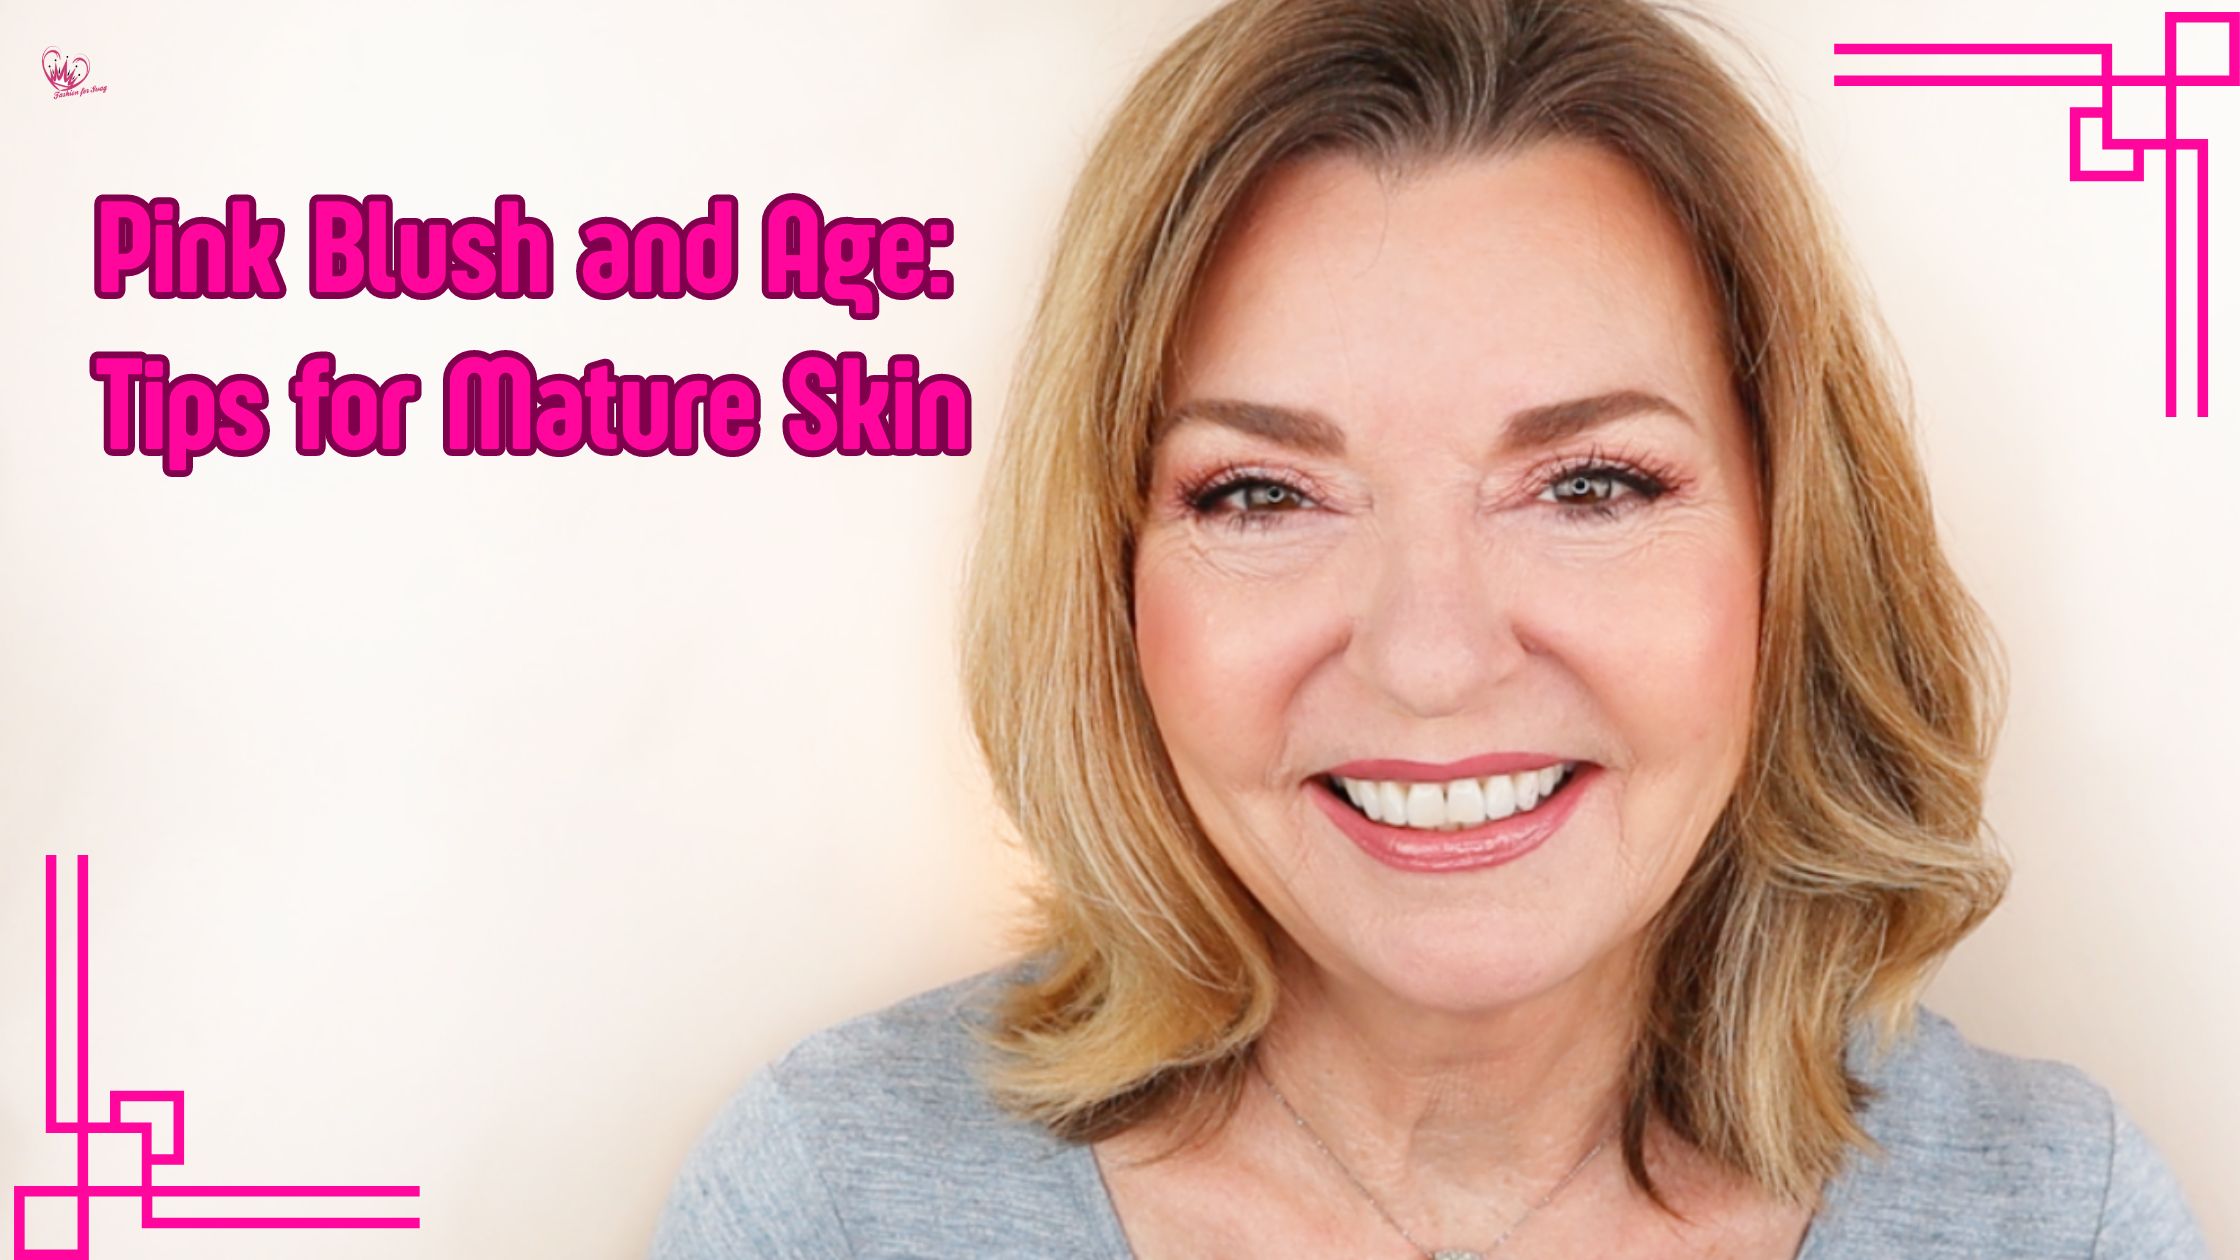 Pink Blush and Age: Tips for Mature Skin